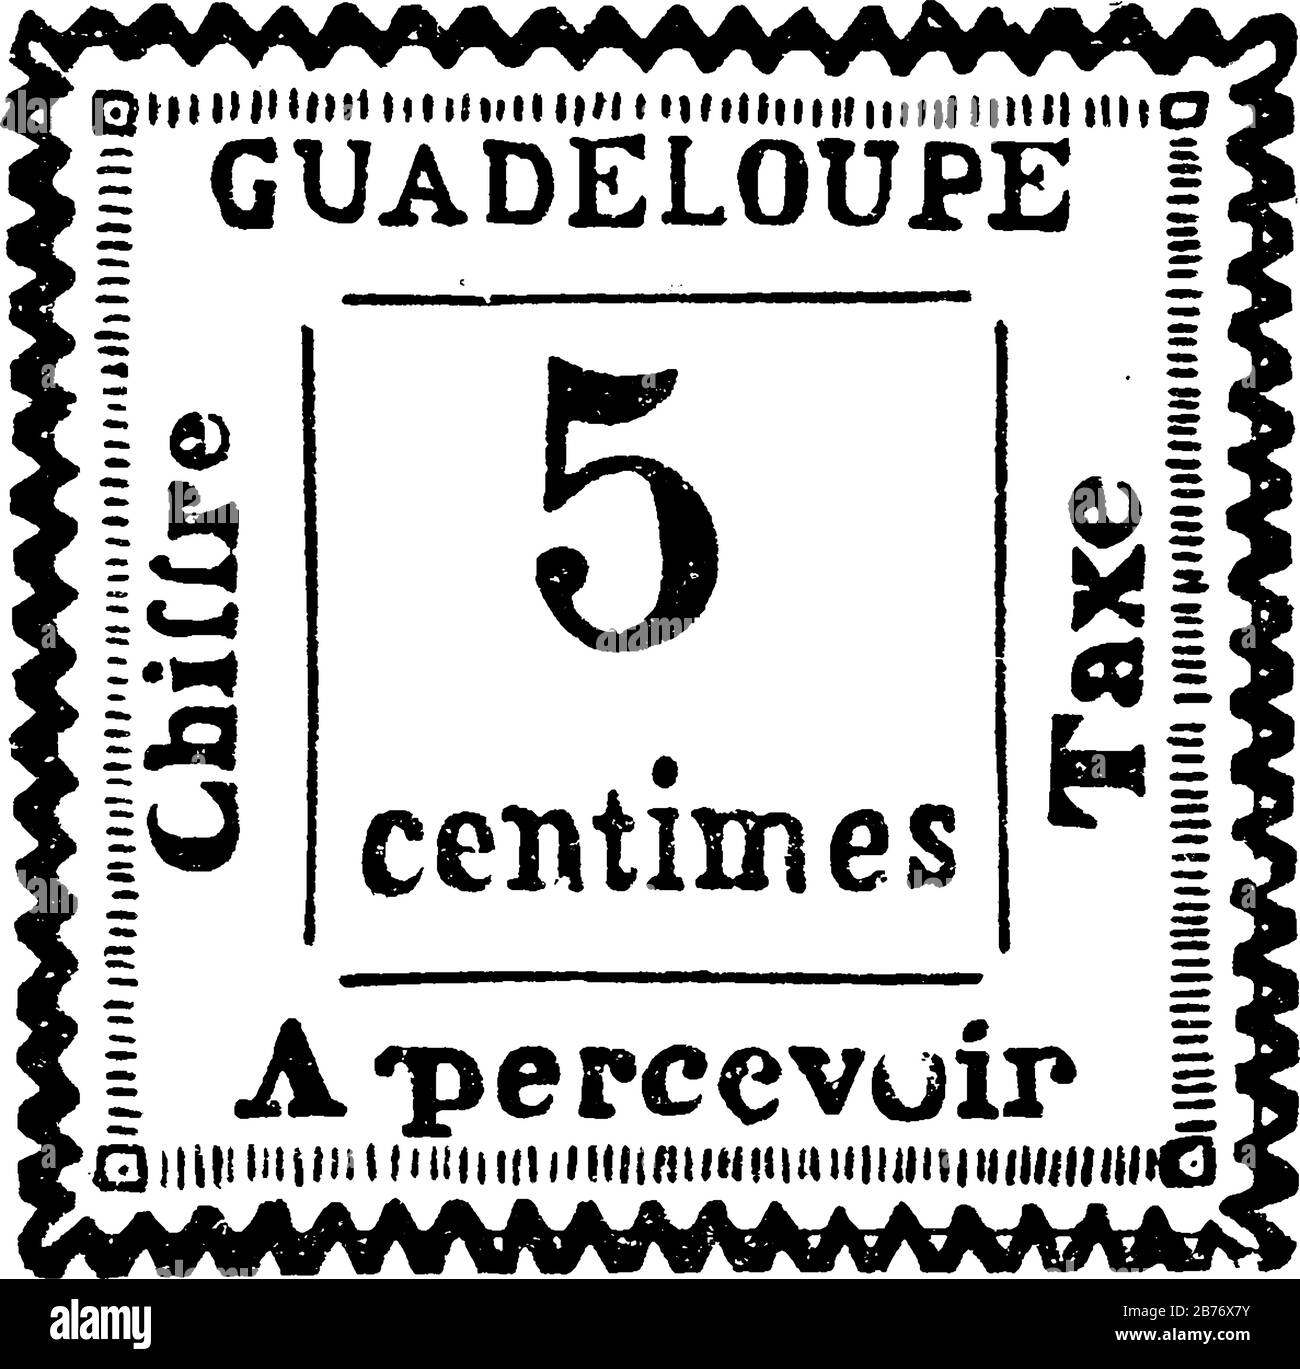 Guadeloupe Stamp (5 centimes) from 1884, a small adhesive piece of paper stuck to something to show an amount of money paid, mainly a postage stamp, v Stock Vector